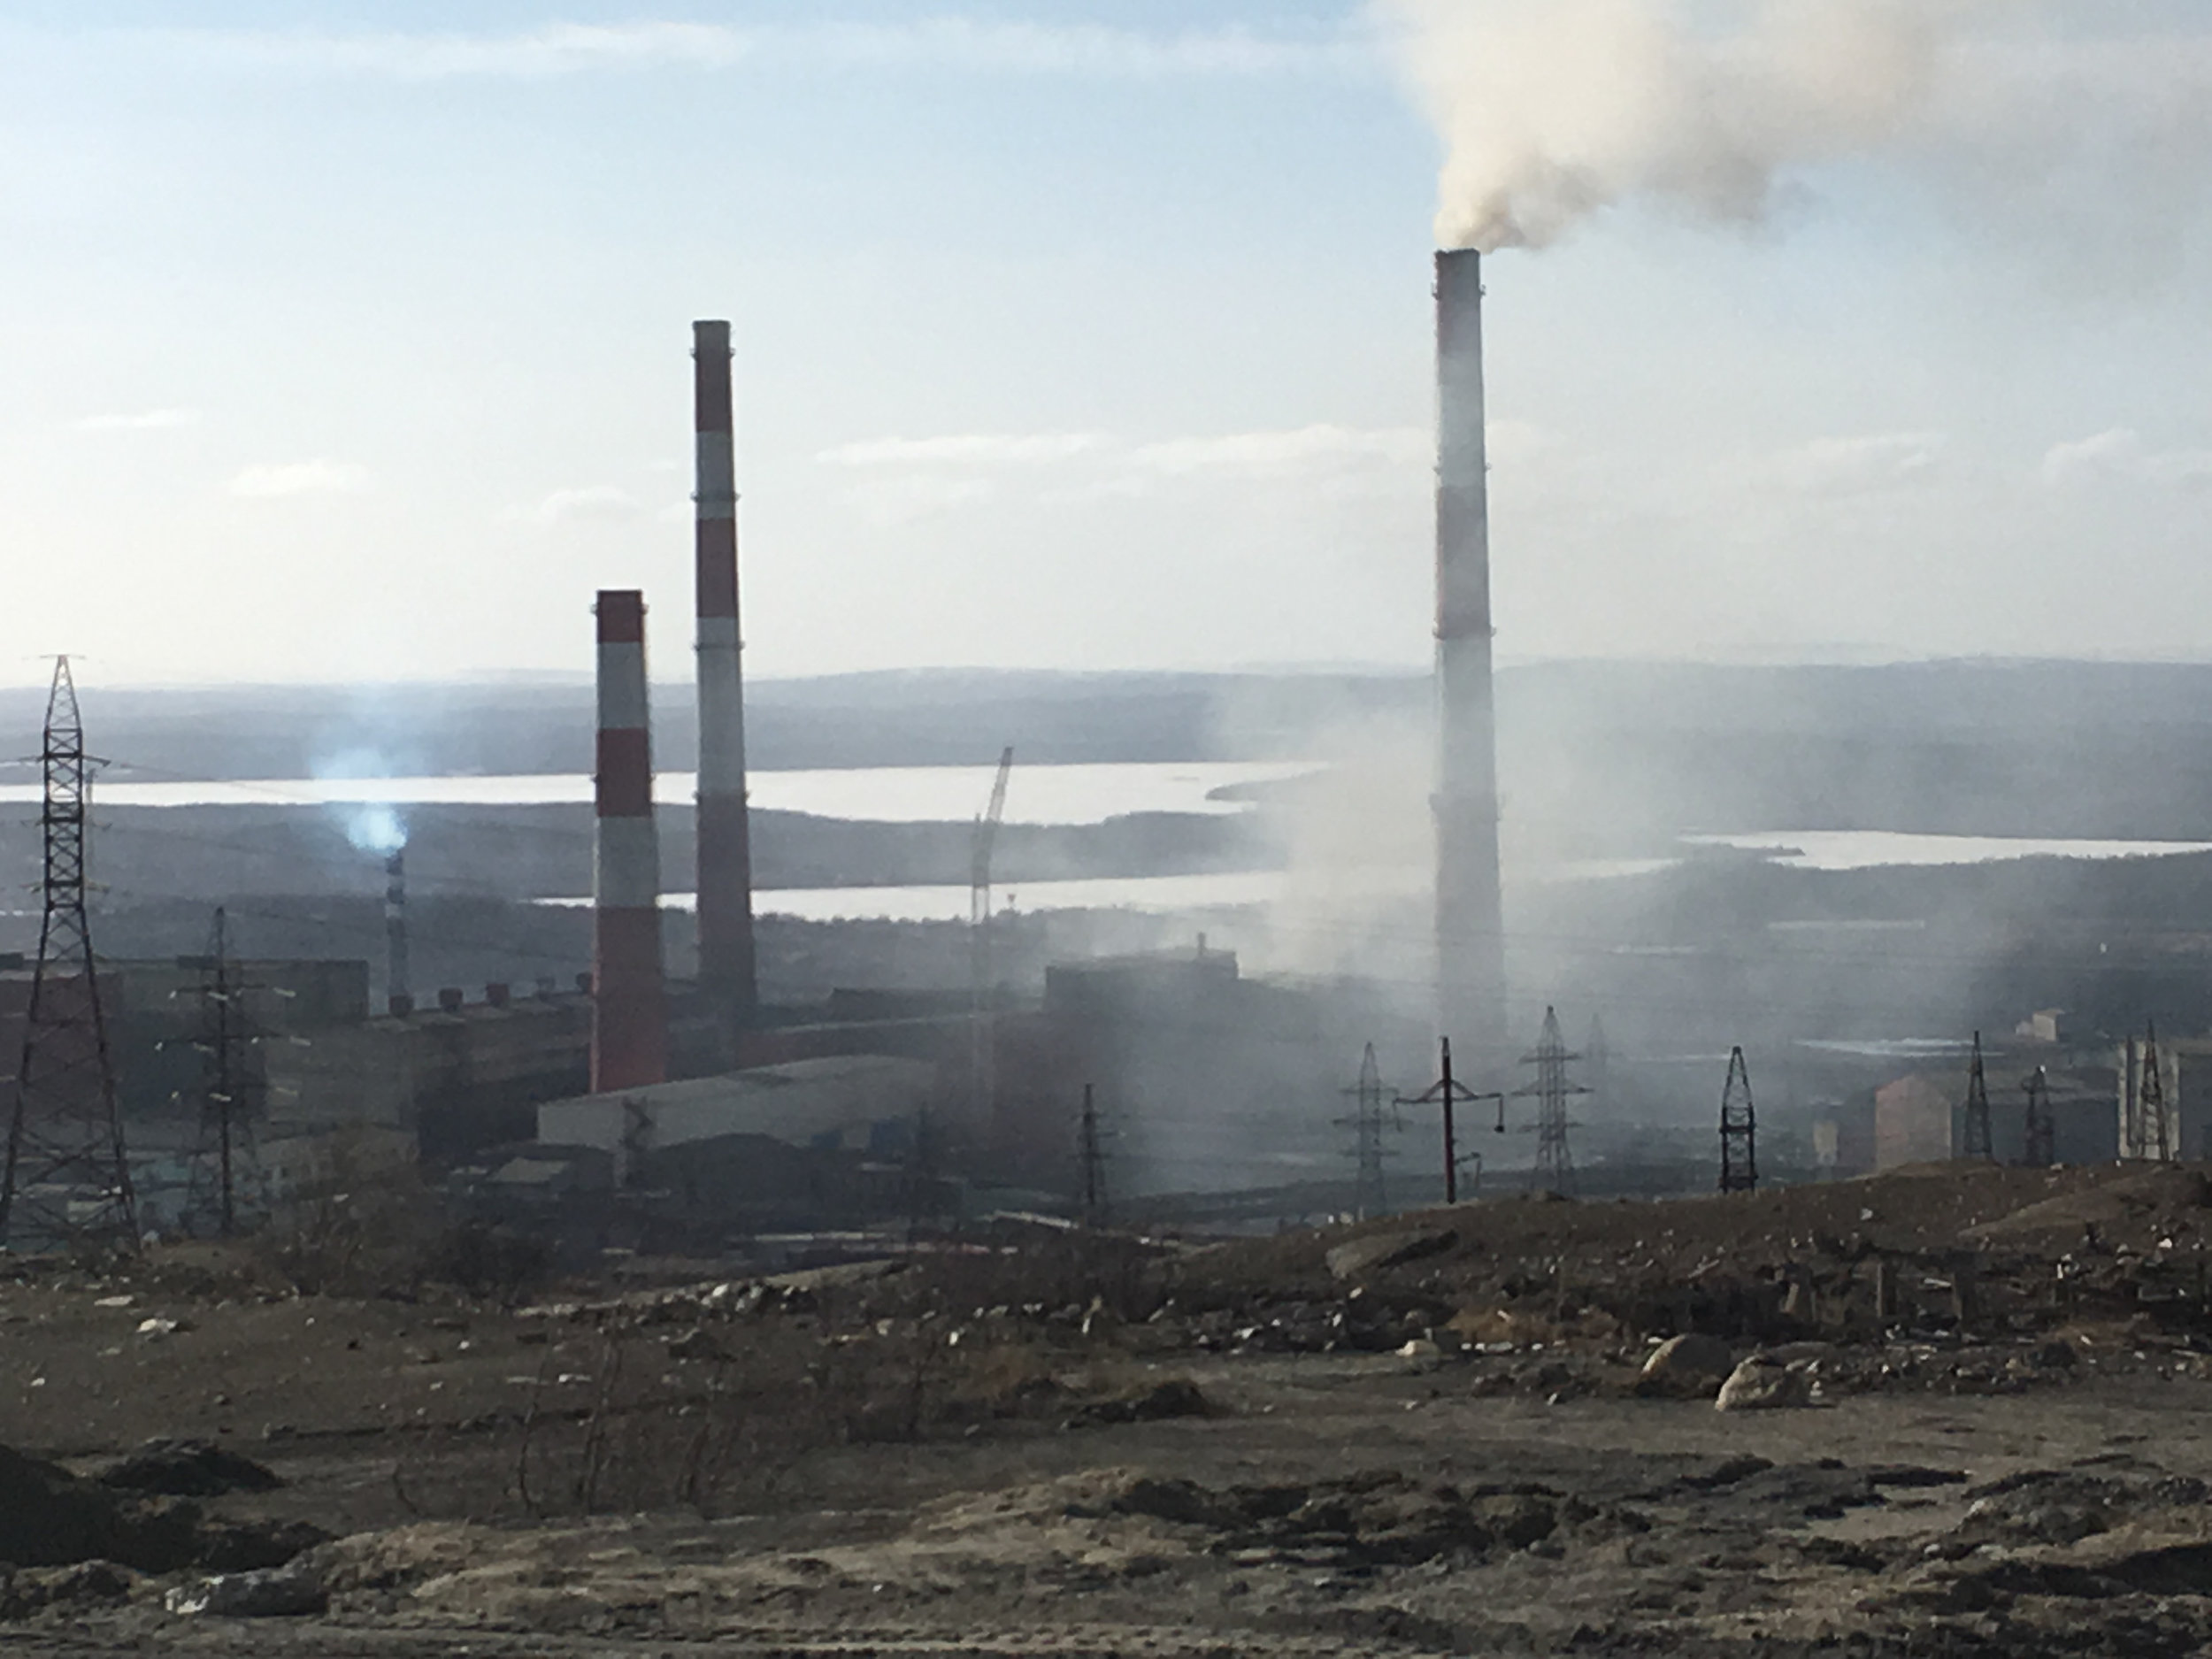 The smelting plant in Nikel is so old, the pollution billows out of the plant itself, in addition to the smokestack.